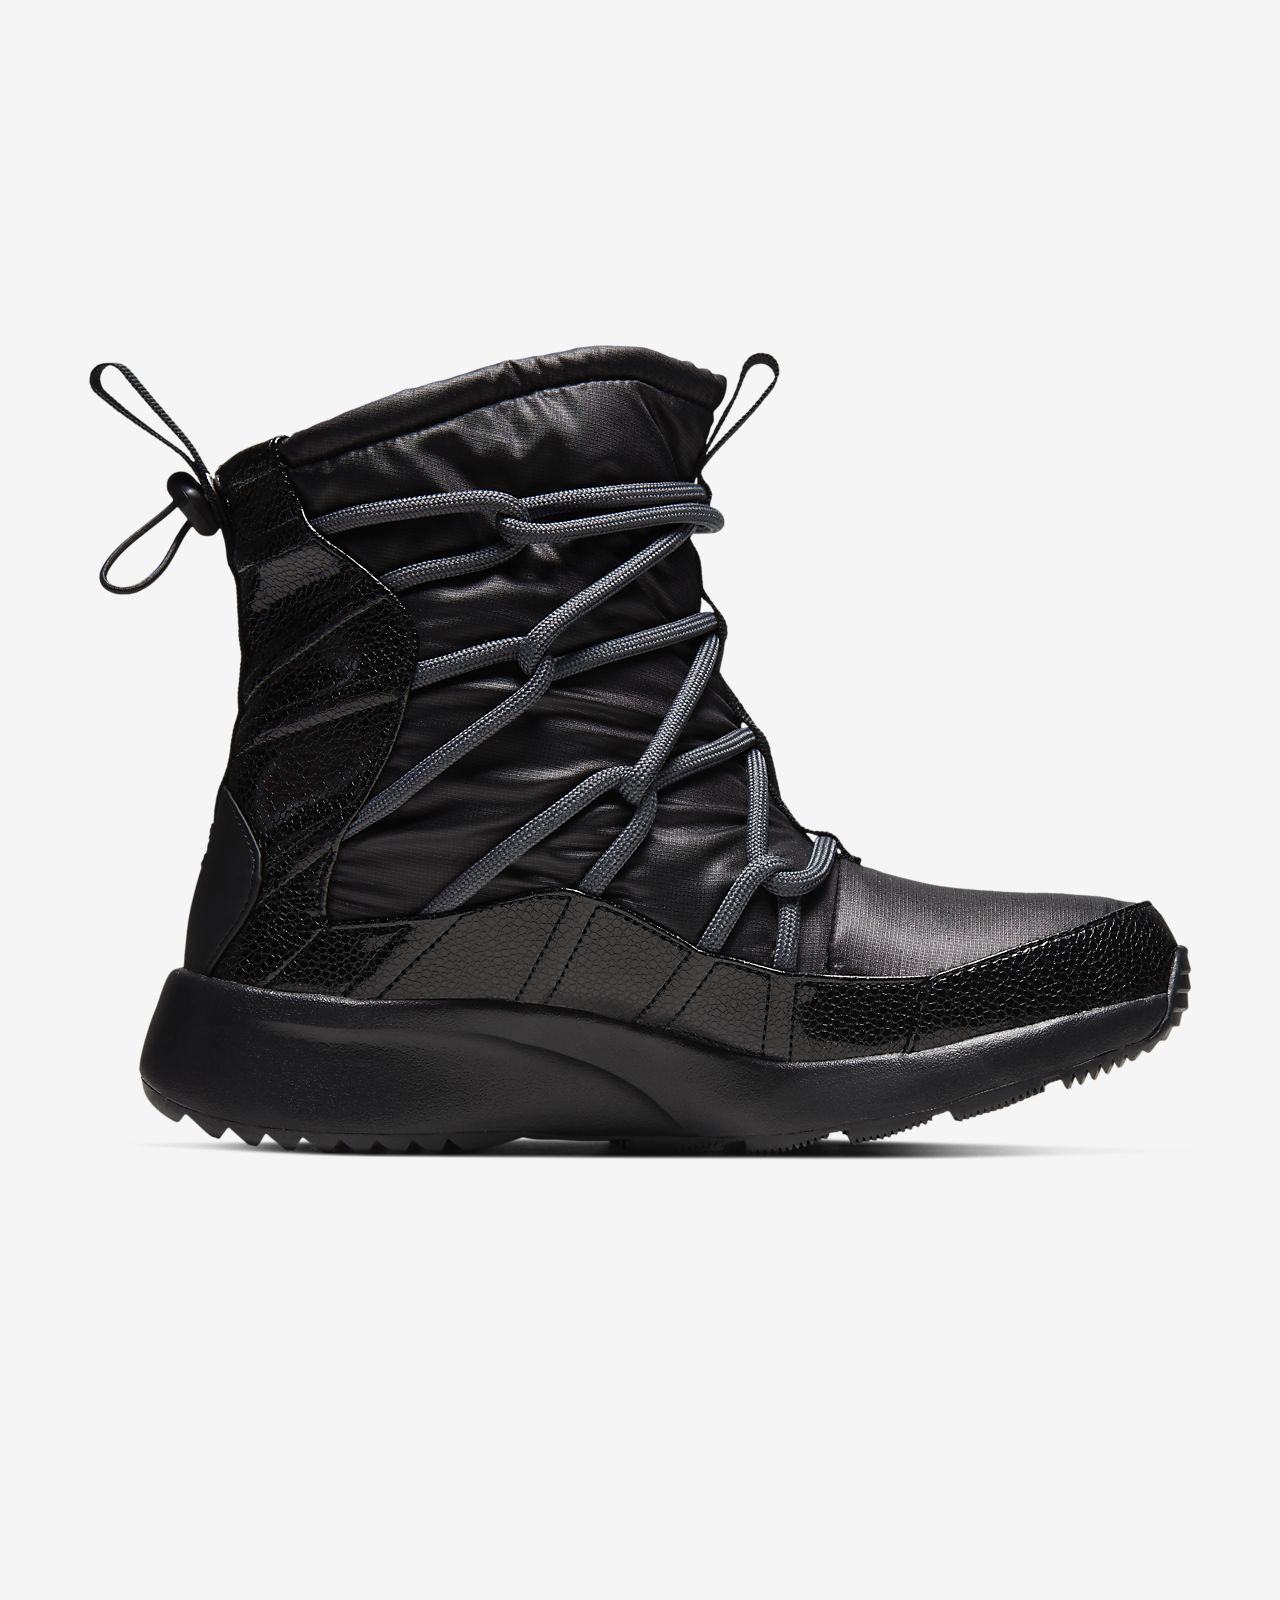 nike winter boots for ladies off 50 